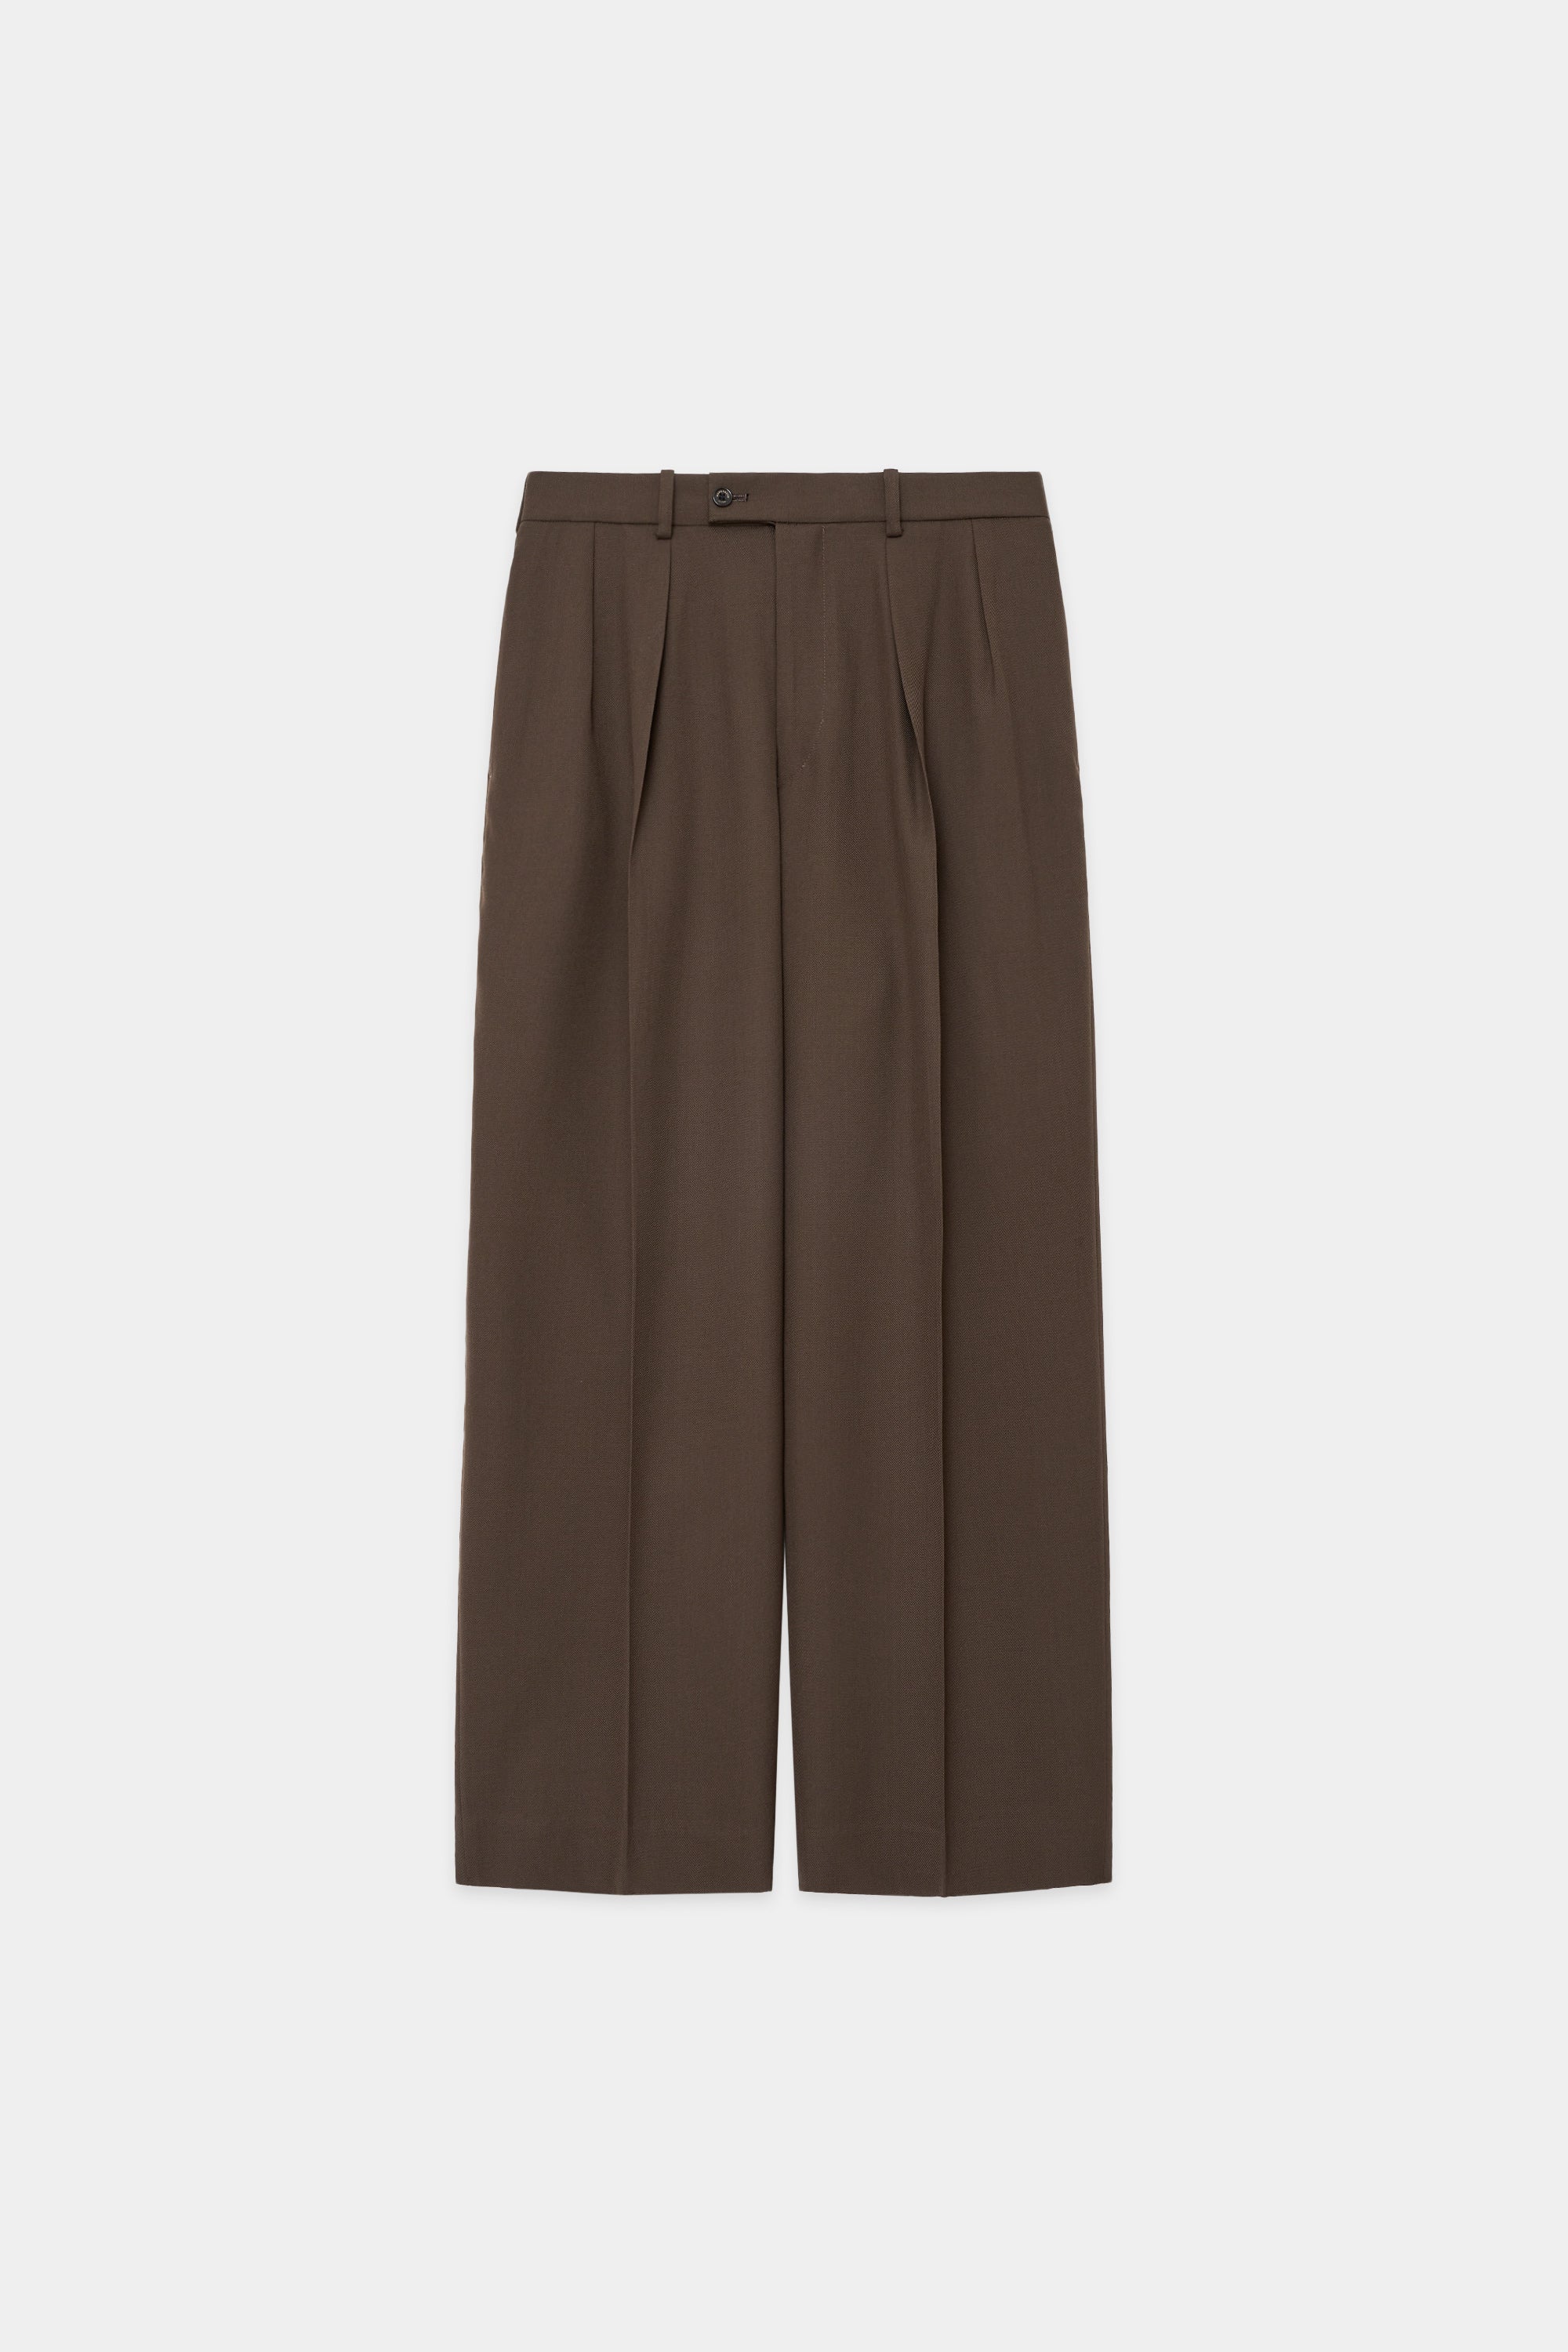 DOUBLE PLEATED TROUSERS サバイバルクロス